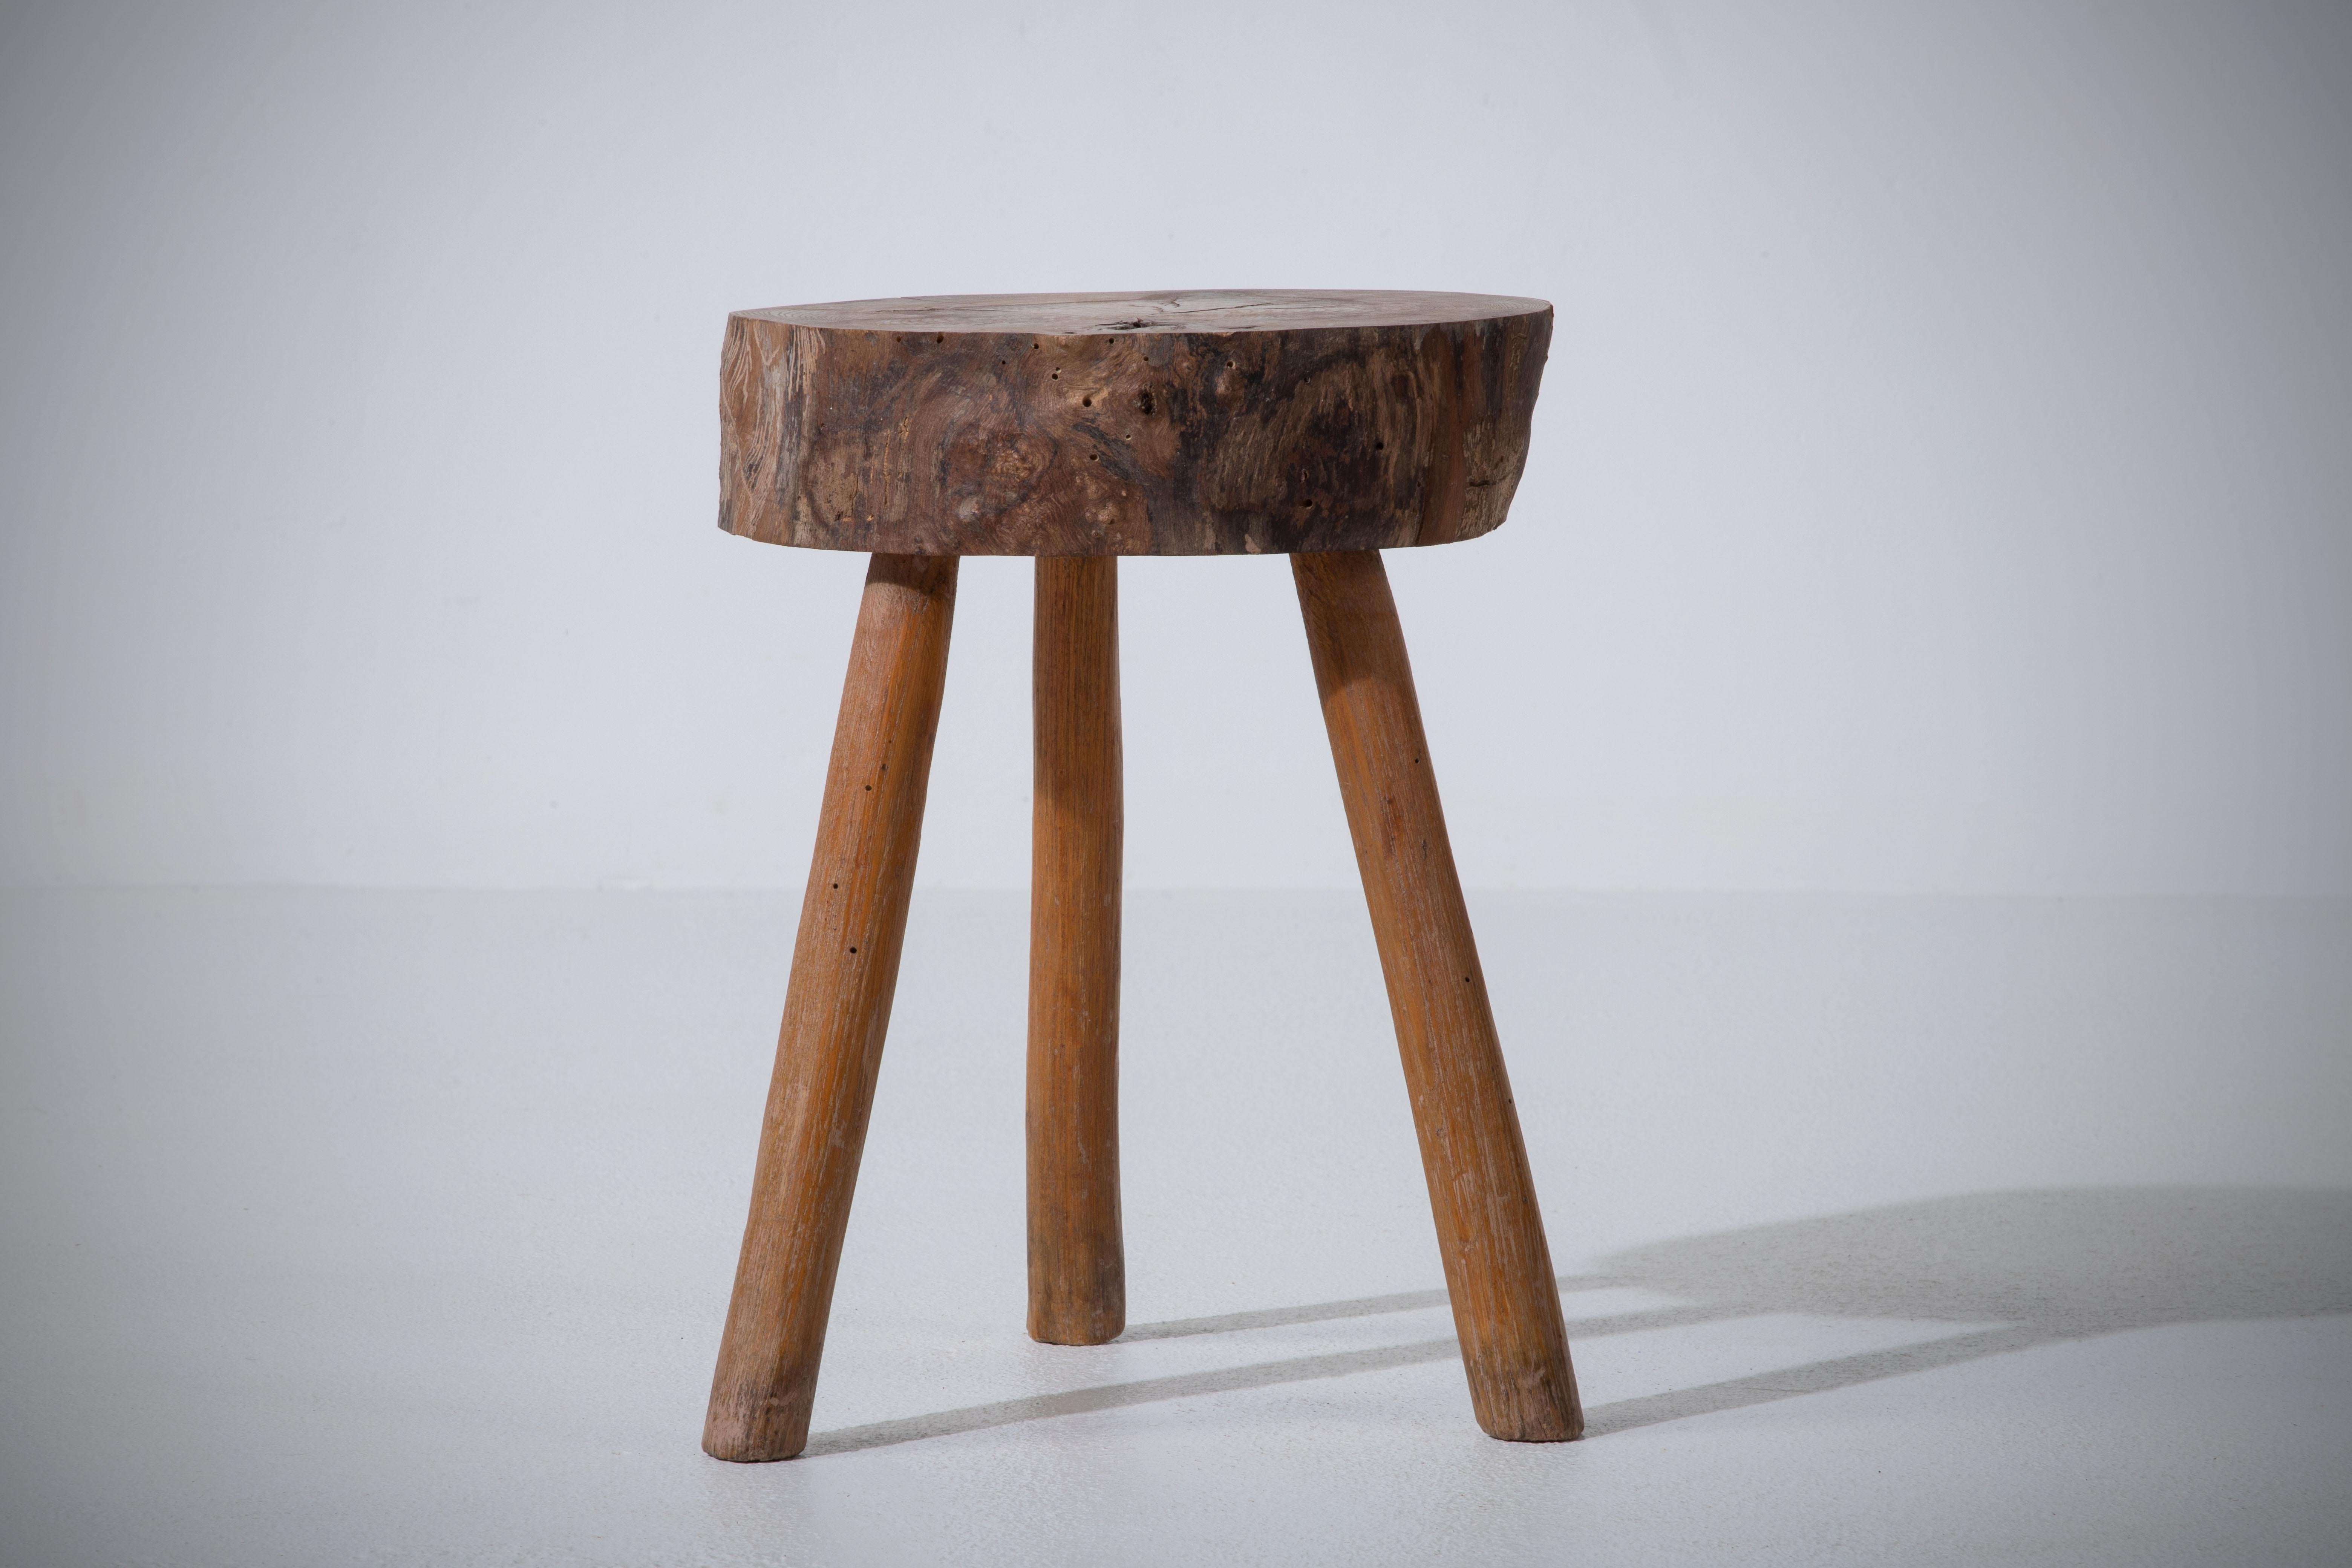 Fantastic wood stool from France in a rustic style. Made in the 1960s with three legs. No hardware. Good vintage condition.